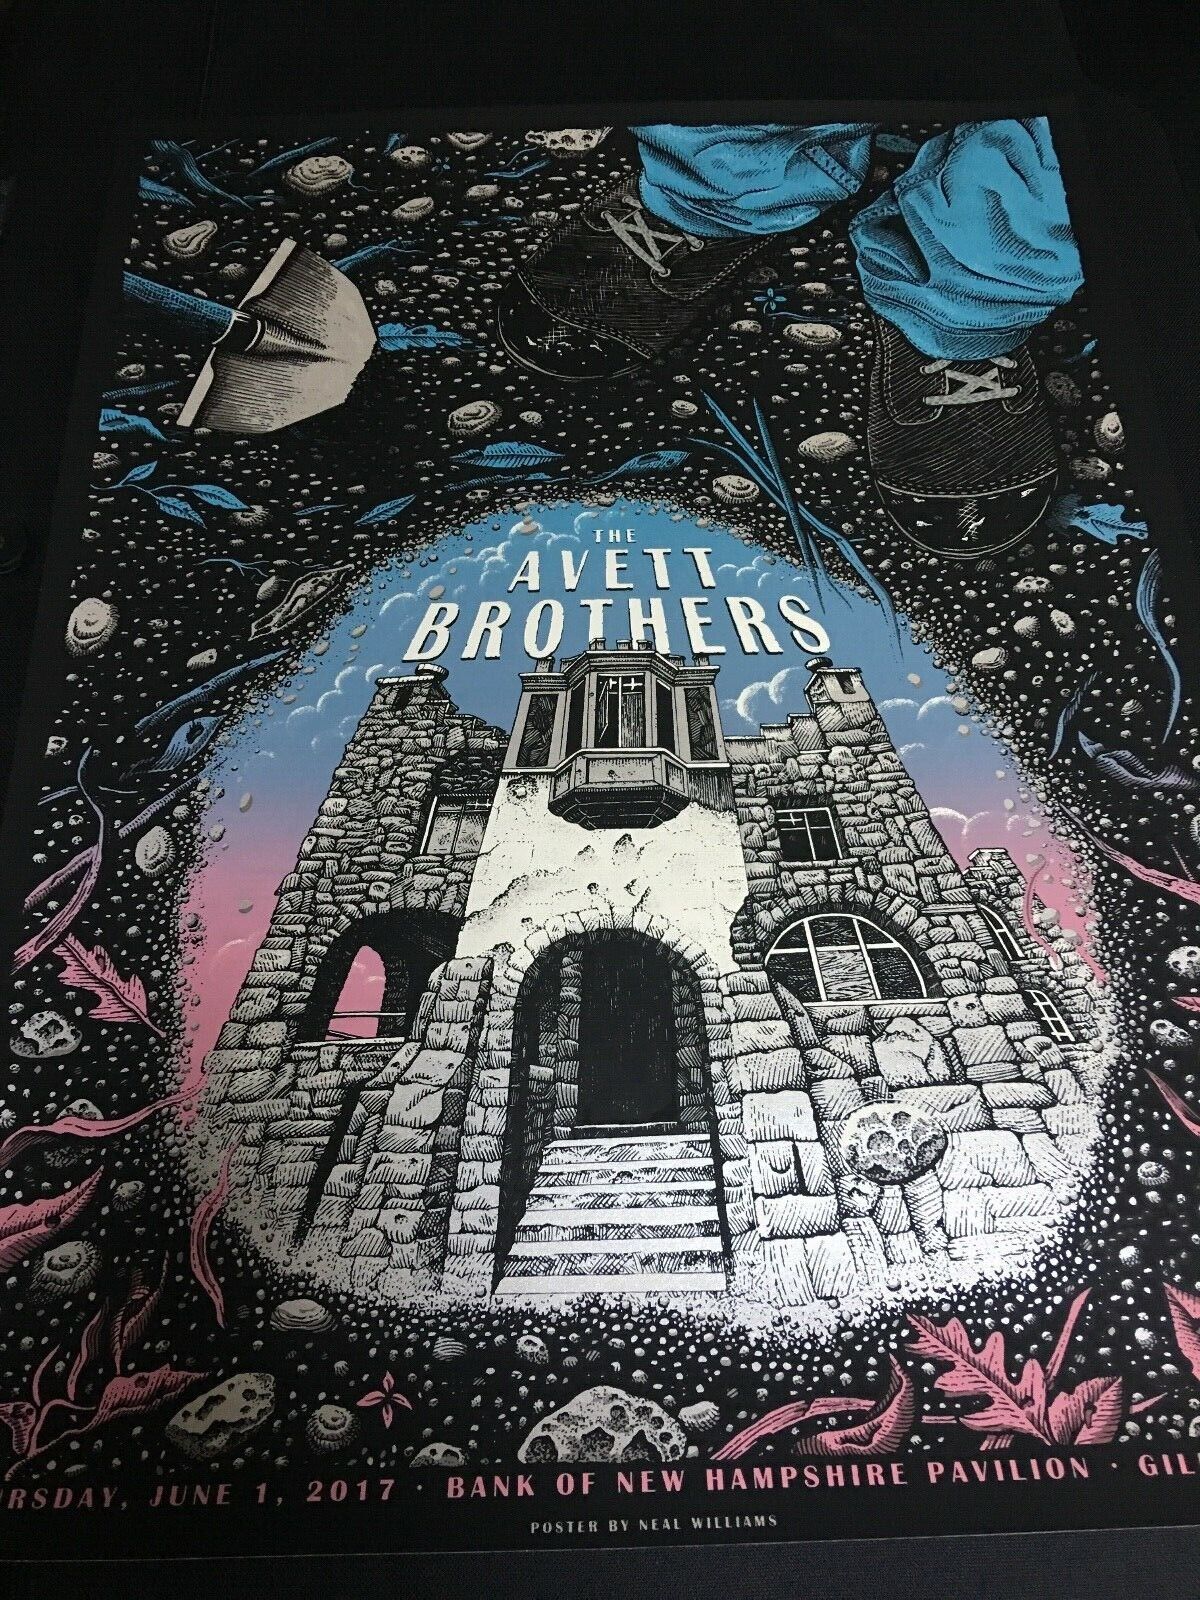 Avett Brothers Concert Poster  Gilford, NH  June 1, 2017. Signed #65/200